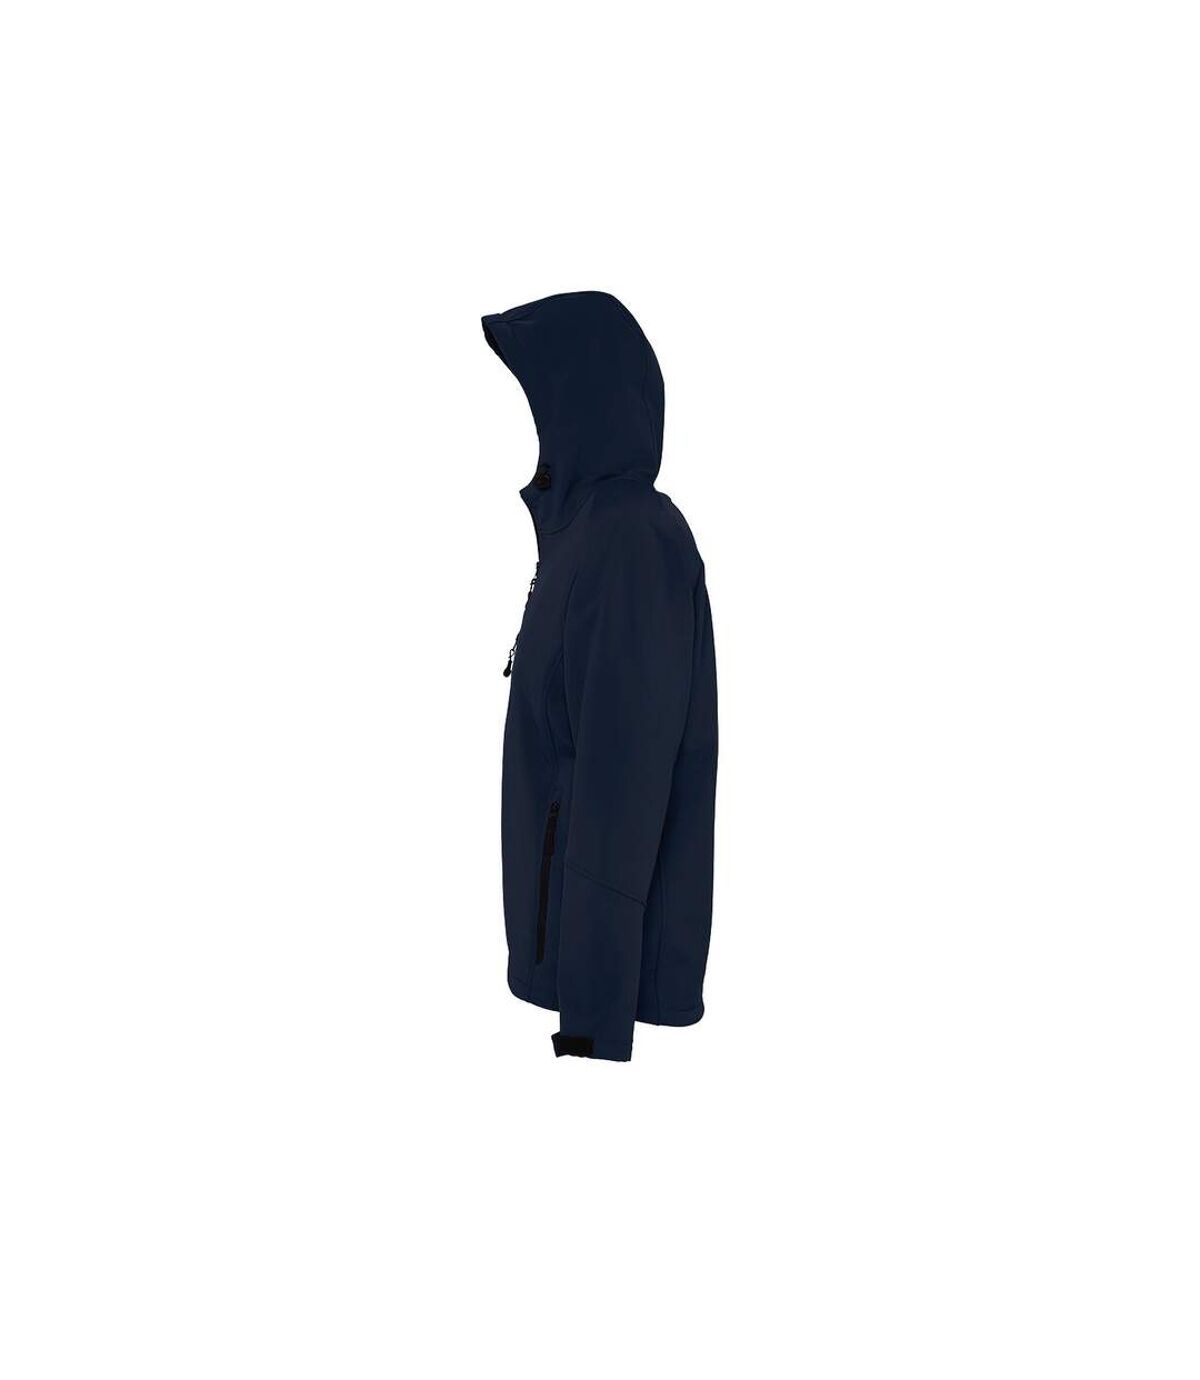 SOLS Mens Replay Hooded Soft Shell Jacket (Breathable, Windproof And Water Resistant) (French Navy) - UTPC410